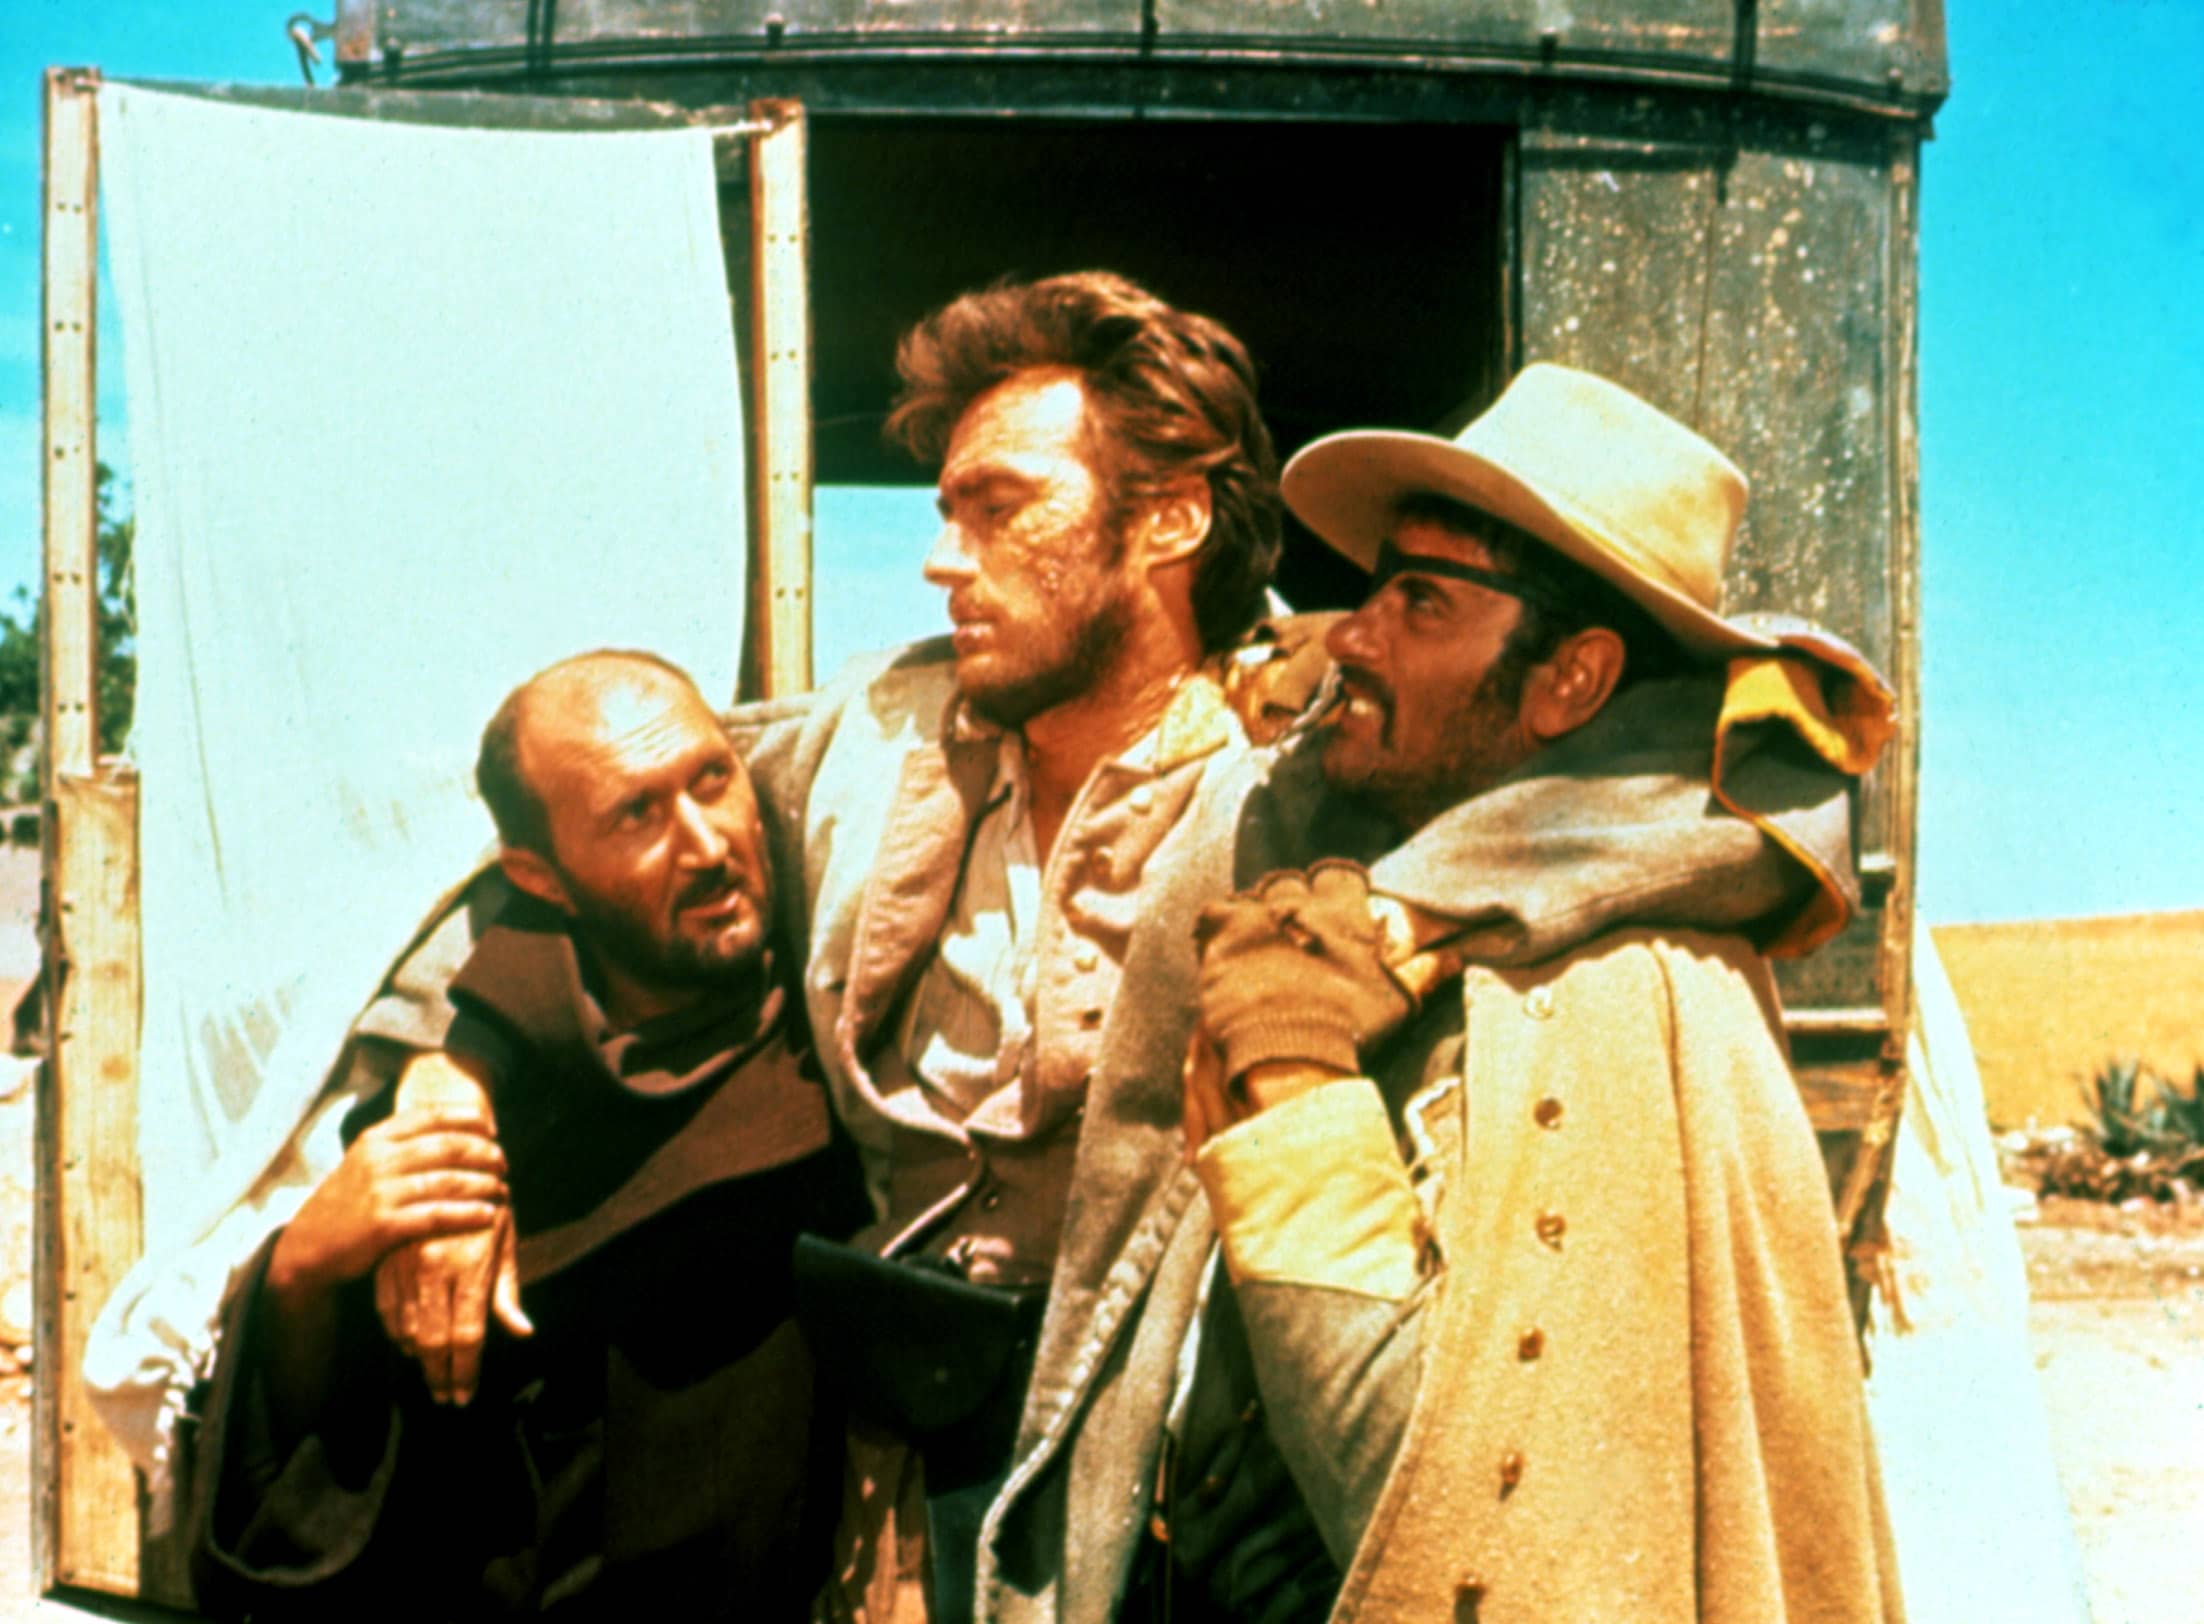 THE GOOD, THE BAD AND THE UGLY, Clint Eastwood (center), 1966